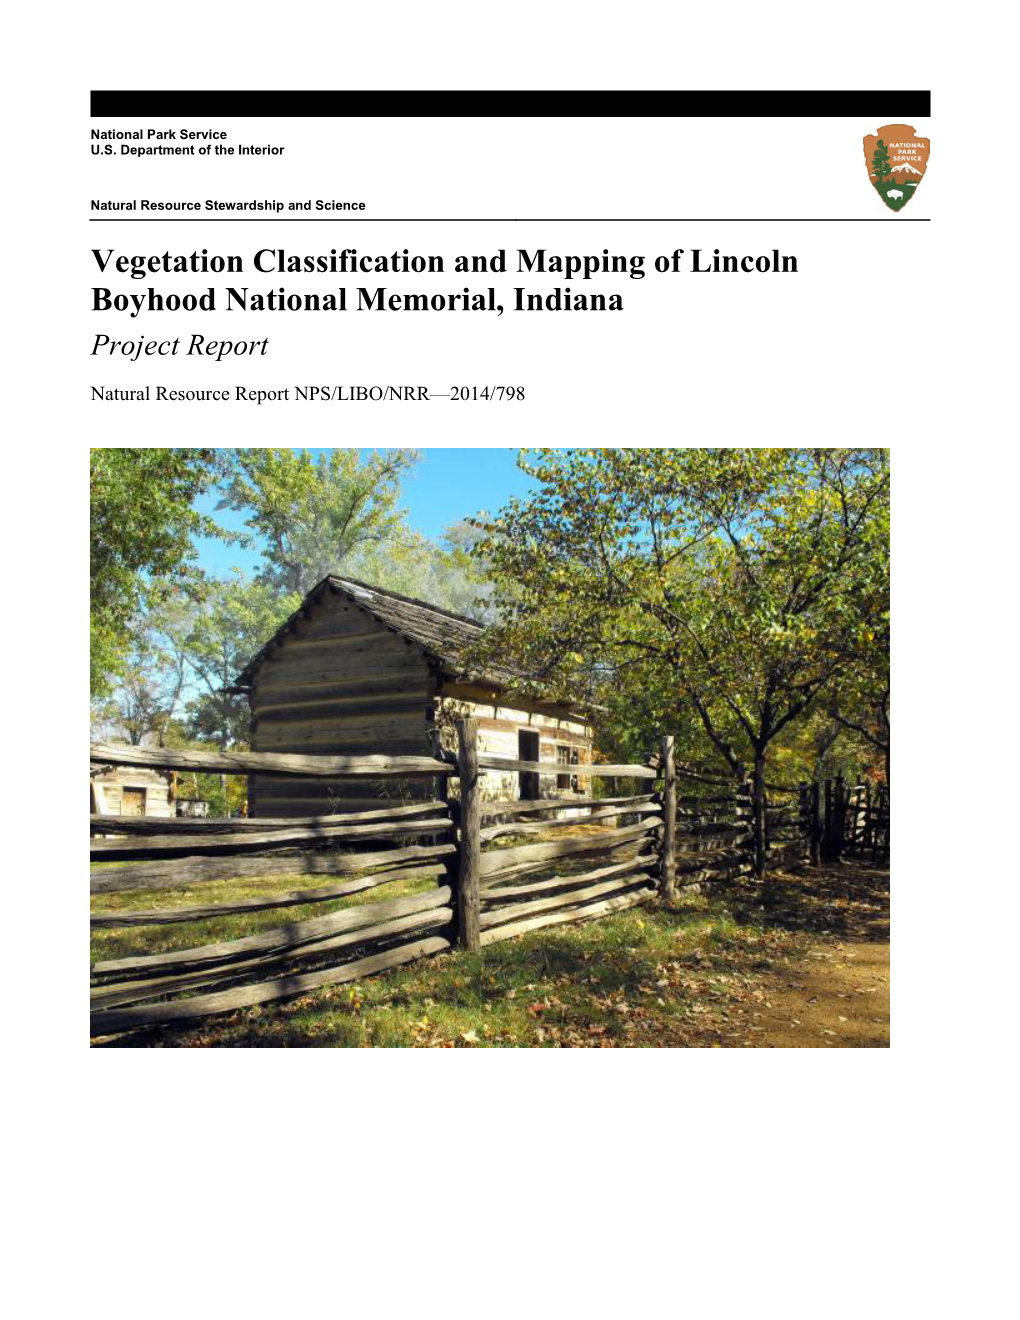 Vegetation Classification and Mapping of Lincoln Boyhood National Memorial, Indiana Project Report